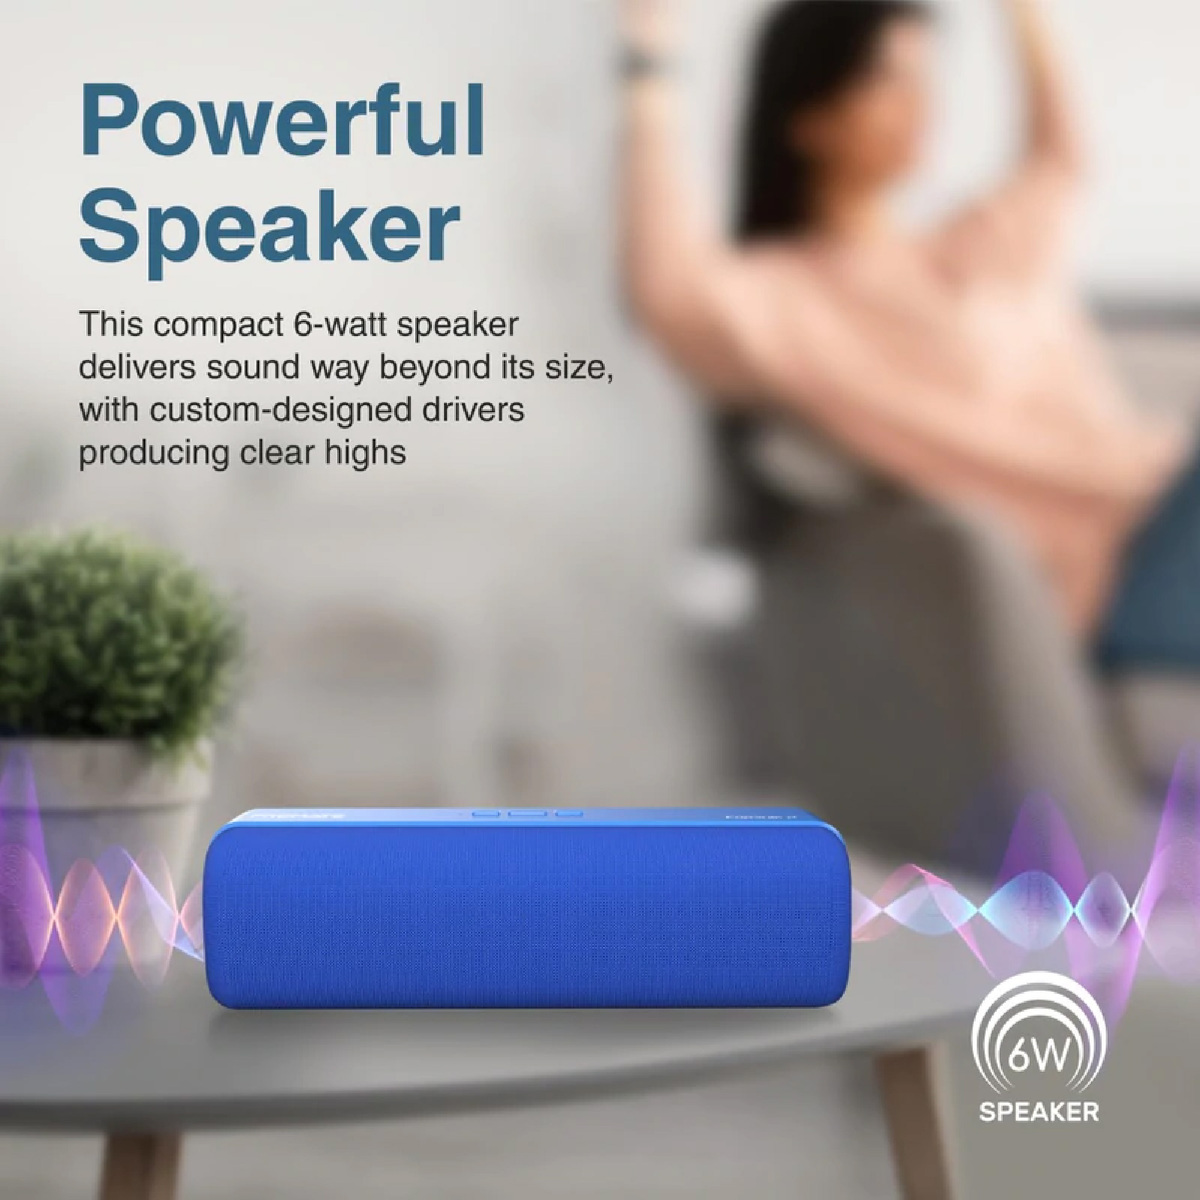 Promate CrystalSound HD Wireless Speaker 6W CAPSULE‐2 Blue